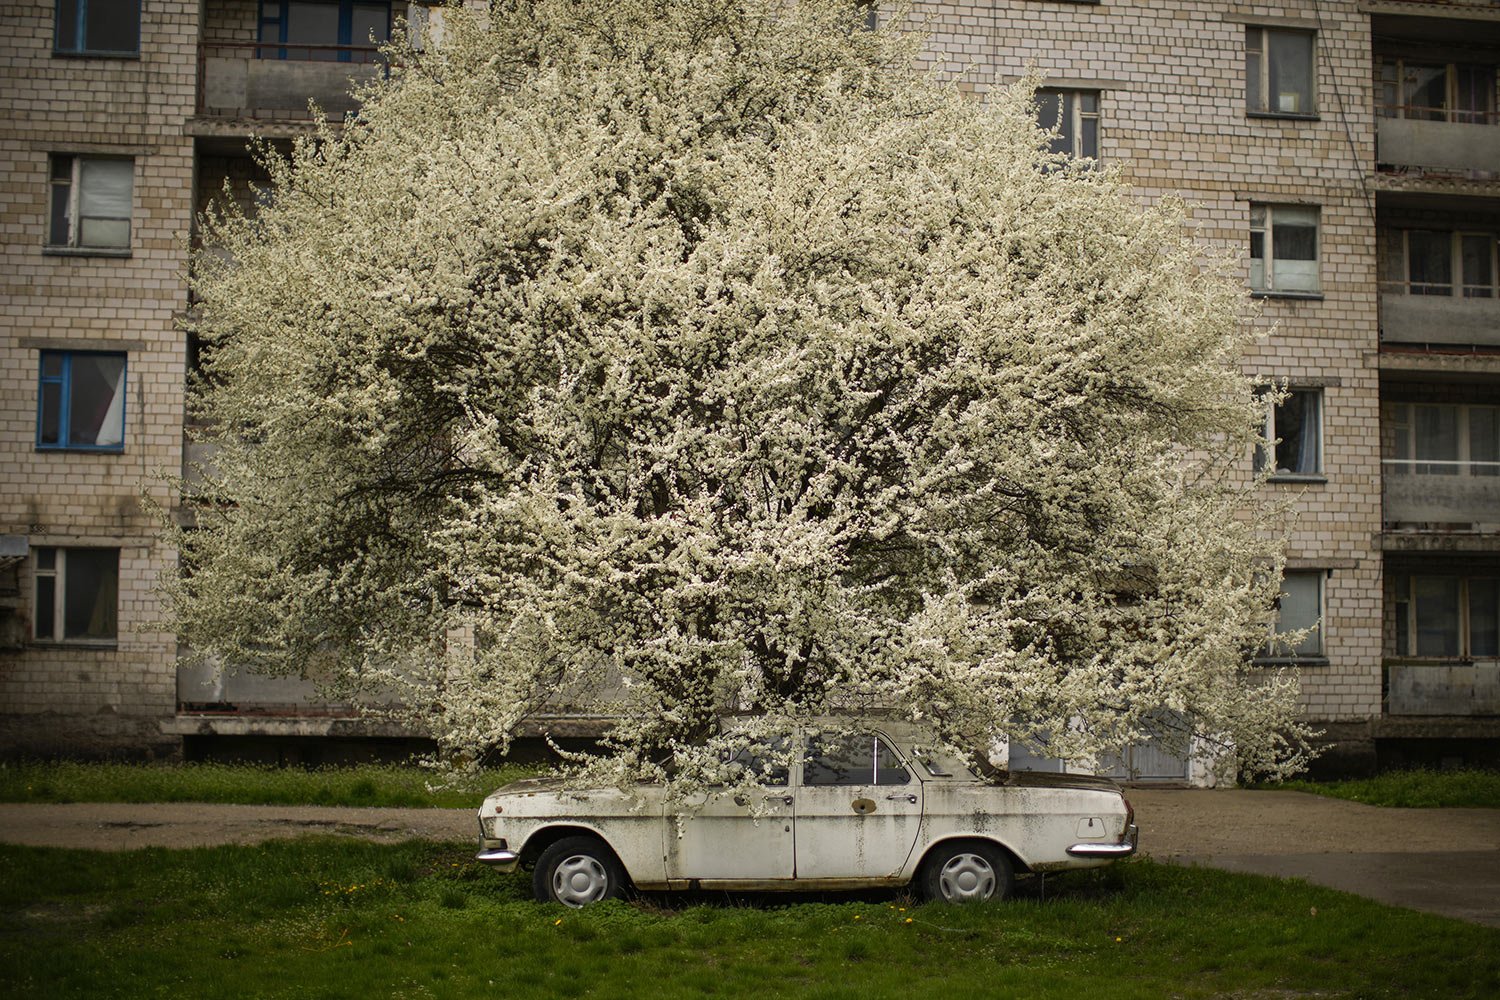  A car is parked under a tree in the partially abandoned town of Chernobyl, Ukraine, Tuesday, April 26, 2022. (AP Photo/Francisco Seco) 